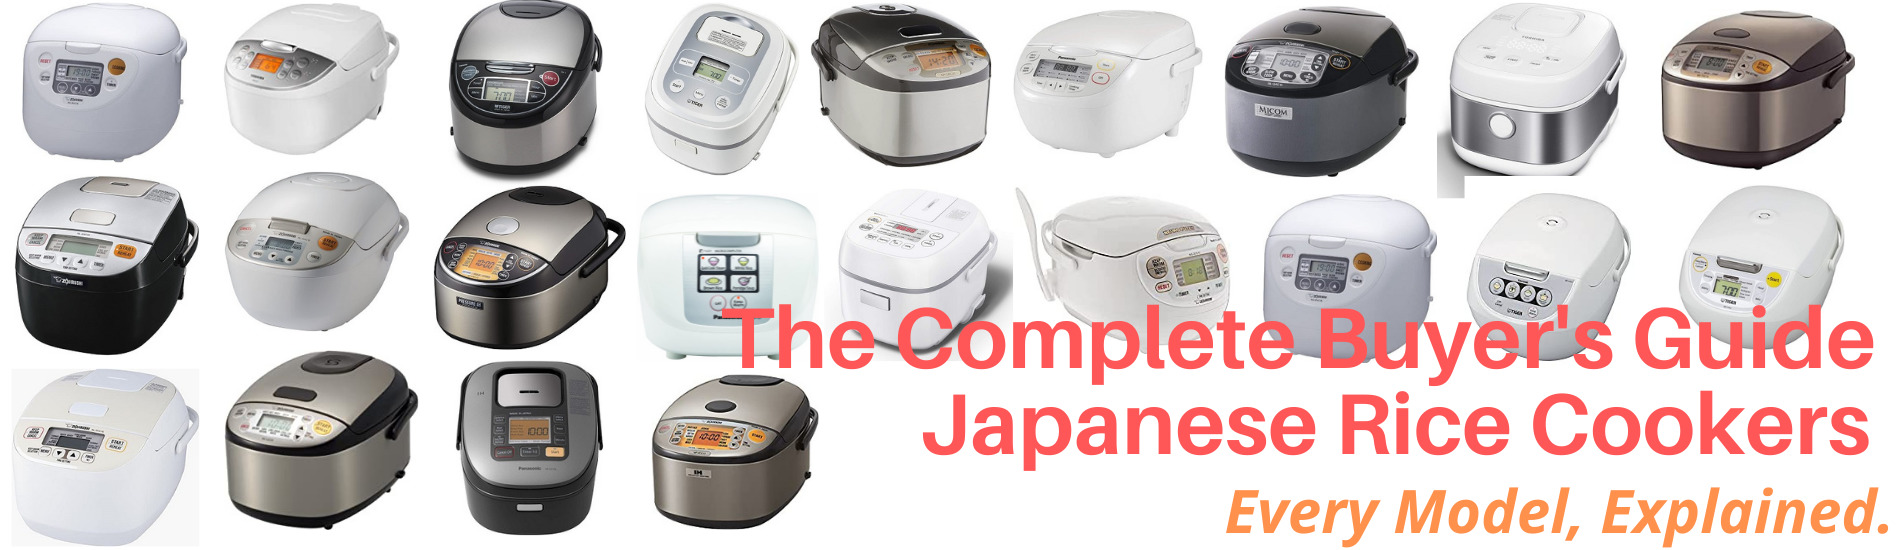 The Complete Guide to Japanese Rice Cookers